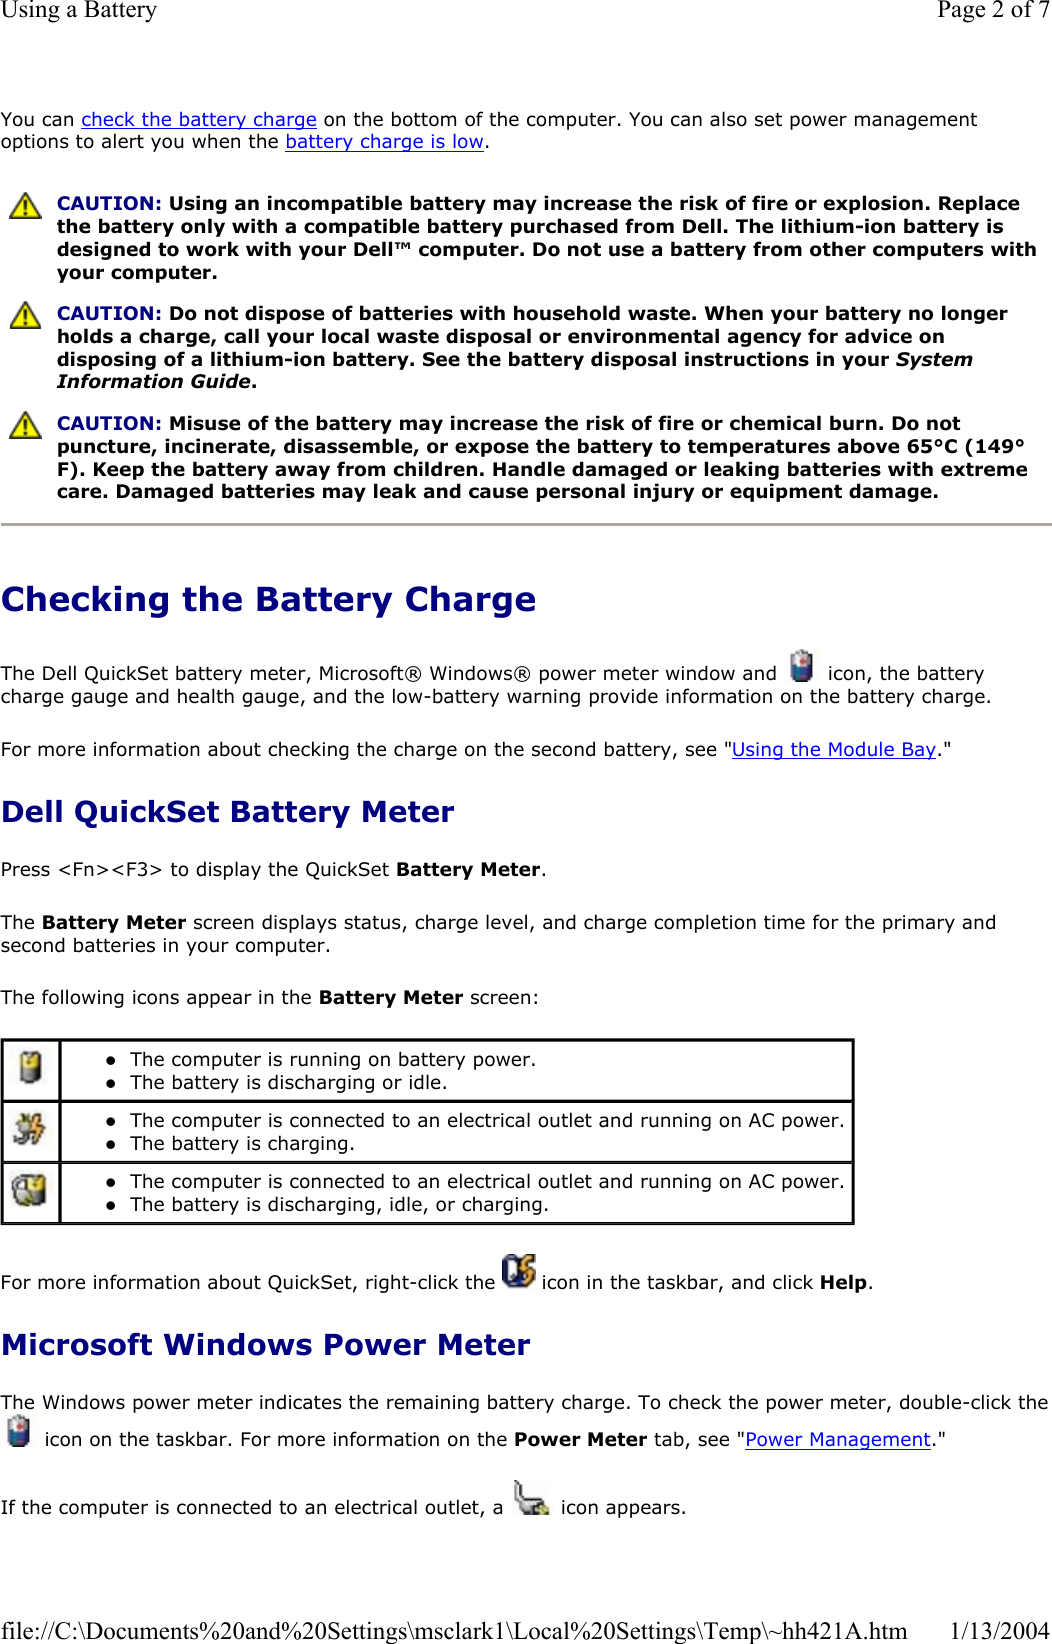 You can check the battery charge on the bottom of the computer. You can also set power management options to alert you when the battery charge is low.Checking the Battery Charge The Dell QuickSet battery meter, Microsoft® Windows® power meter window and   icon, the battery charge gauge and health gauge, and the low-battery warning provide information on the battery charge.  For more information about checking the charge on the second battery, see &quot;Using the Module Bay.&quot;Dell QuickSet Battery Meter Press &lt;Fn&gt;&lt;F3&gt; to display the QuickSet Battery Meter.The Battery Meter screen displays status, charge level, and charge completion time for the primary and second batteries in your computer. The following icons appear in the Battery Meter screen: For more information about QuickSet, right-click the   icon in the taskbar, and click Help.Microsoft Windows Power Meter The Windows power meter indicates the remaining battery charge. To check the power meter, double-click the icon on the taskbar. For more information on the Power Meter tab, see &quot;Power Management.&quot;If the computer is connected to an electrical outlet, a   icon appears. CAUTION: Using an incompatible battery may increase the risk of fire or explosion. Replace the battery only with a compatible battery purchased from Dell. The lithium-ion battery is designed to work with your Dell™ computer. Do not use a battery from other computers with your computer. CAUTION: Do not dispose of batteries with household waste. When your battery no longer holds a charge, call your local waste disposal or environmental agency for advice on disposing of a lithium-ion battery. See the battery disposal instructions in your System Information Guide.CAUTION: Misuse of the battery may increase the risk of fire or chemical burn. Do not puncture, incinerate, disassemble, or expose the battery to temperatures above 65°C (149°F). Keep the battery away from children. Handle damaged or leaking batteries with extreme care. Damaged batteries may leak and cause personal injury or equipment damage. zThe computer is running on battery power.  zThe battery is discharging or idle.  zThe computer is connected to an electrical outlet and running on AC power. zThe battery is charging.  zThe computer is connected to an electrical outlet and running on AC power. zThe battery is discharging, idle, or charging.  Page 2 of 7Using a Battery1/13/2004file://C:\Documents%20and%20Settings\msclark1\Local%20Settings\Temp\~hh421A.htm